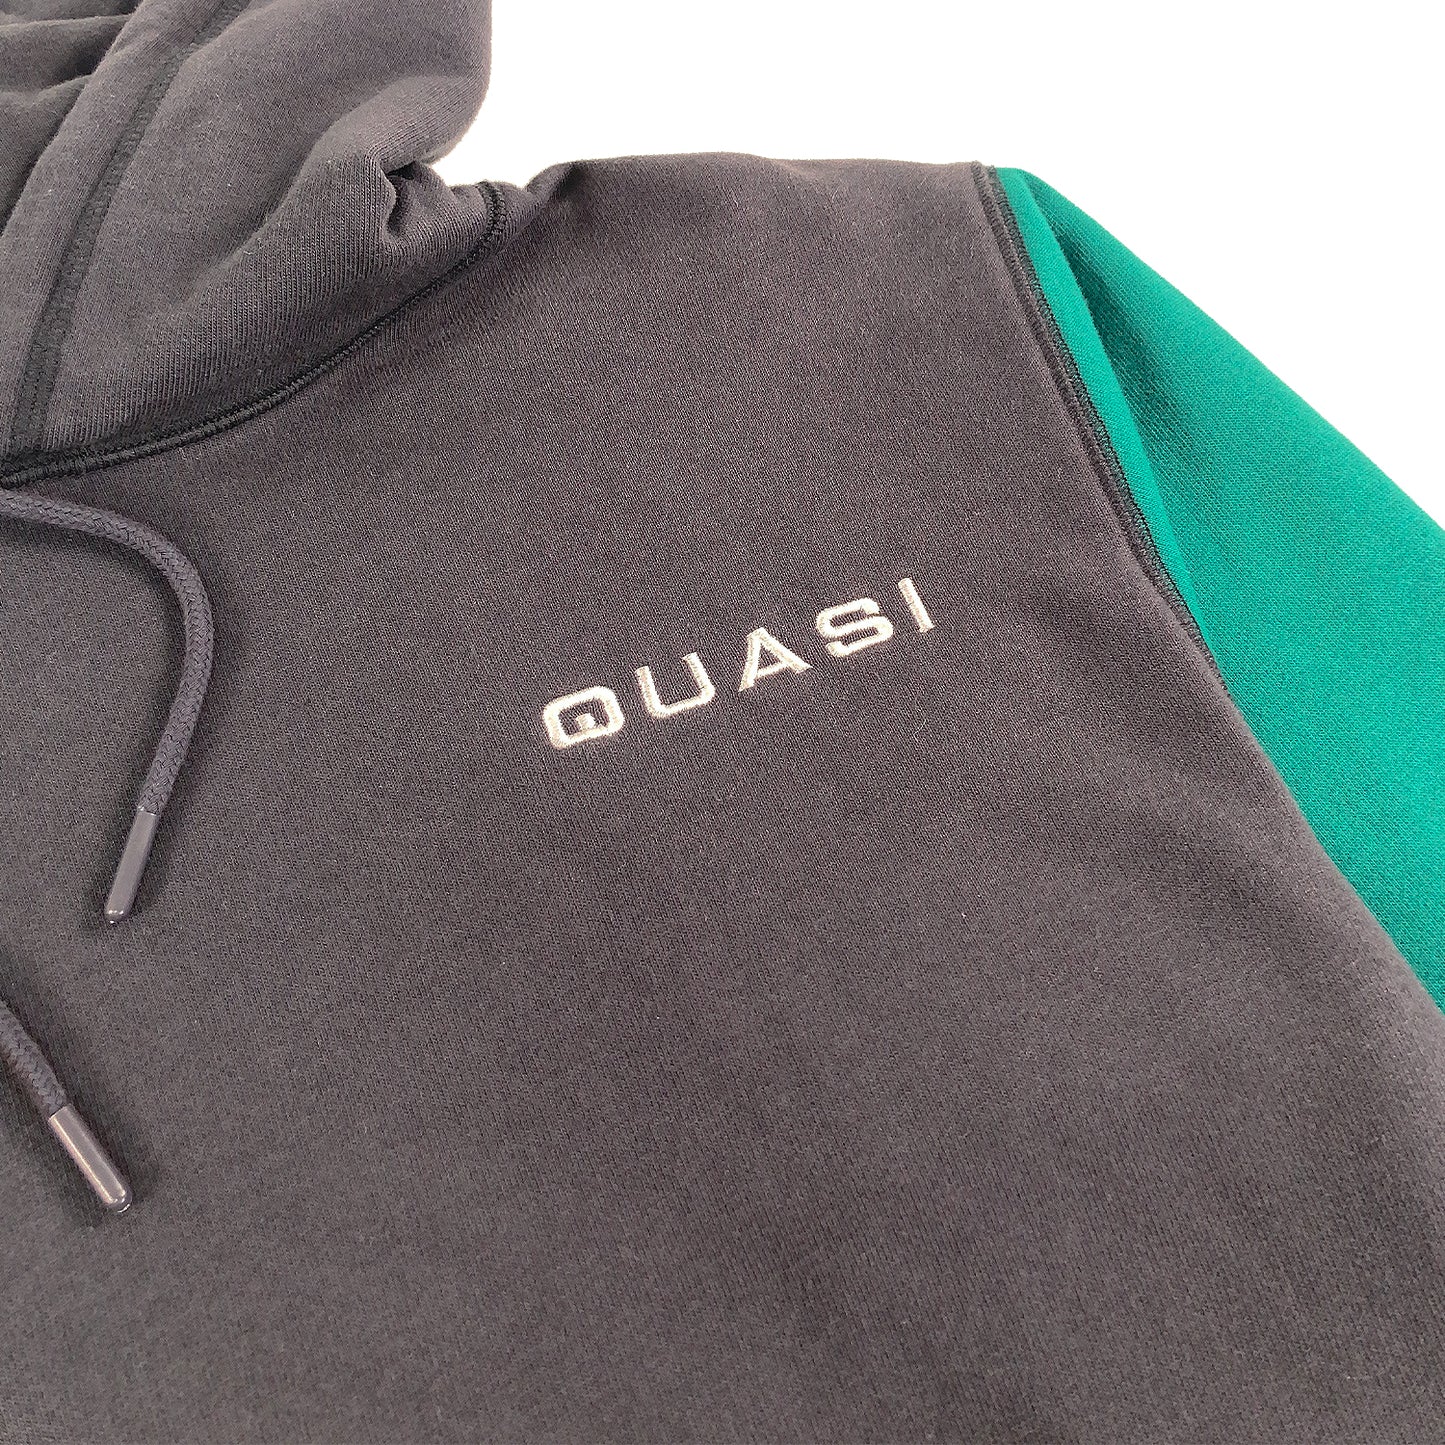 Quasi Blockhead Hooded Sweat - Navy / Forest - Prime Delux Store